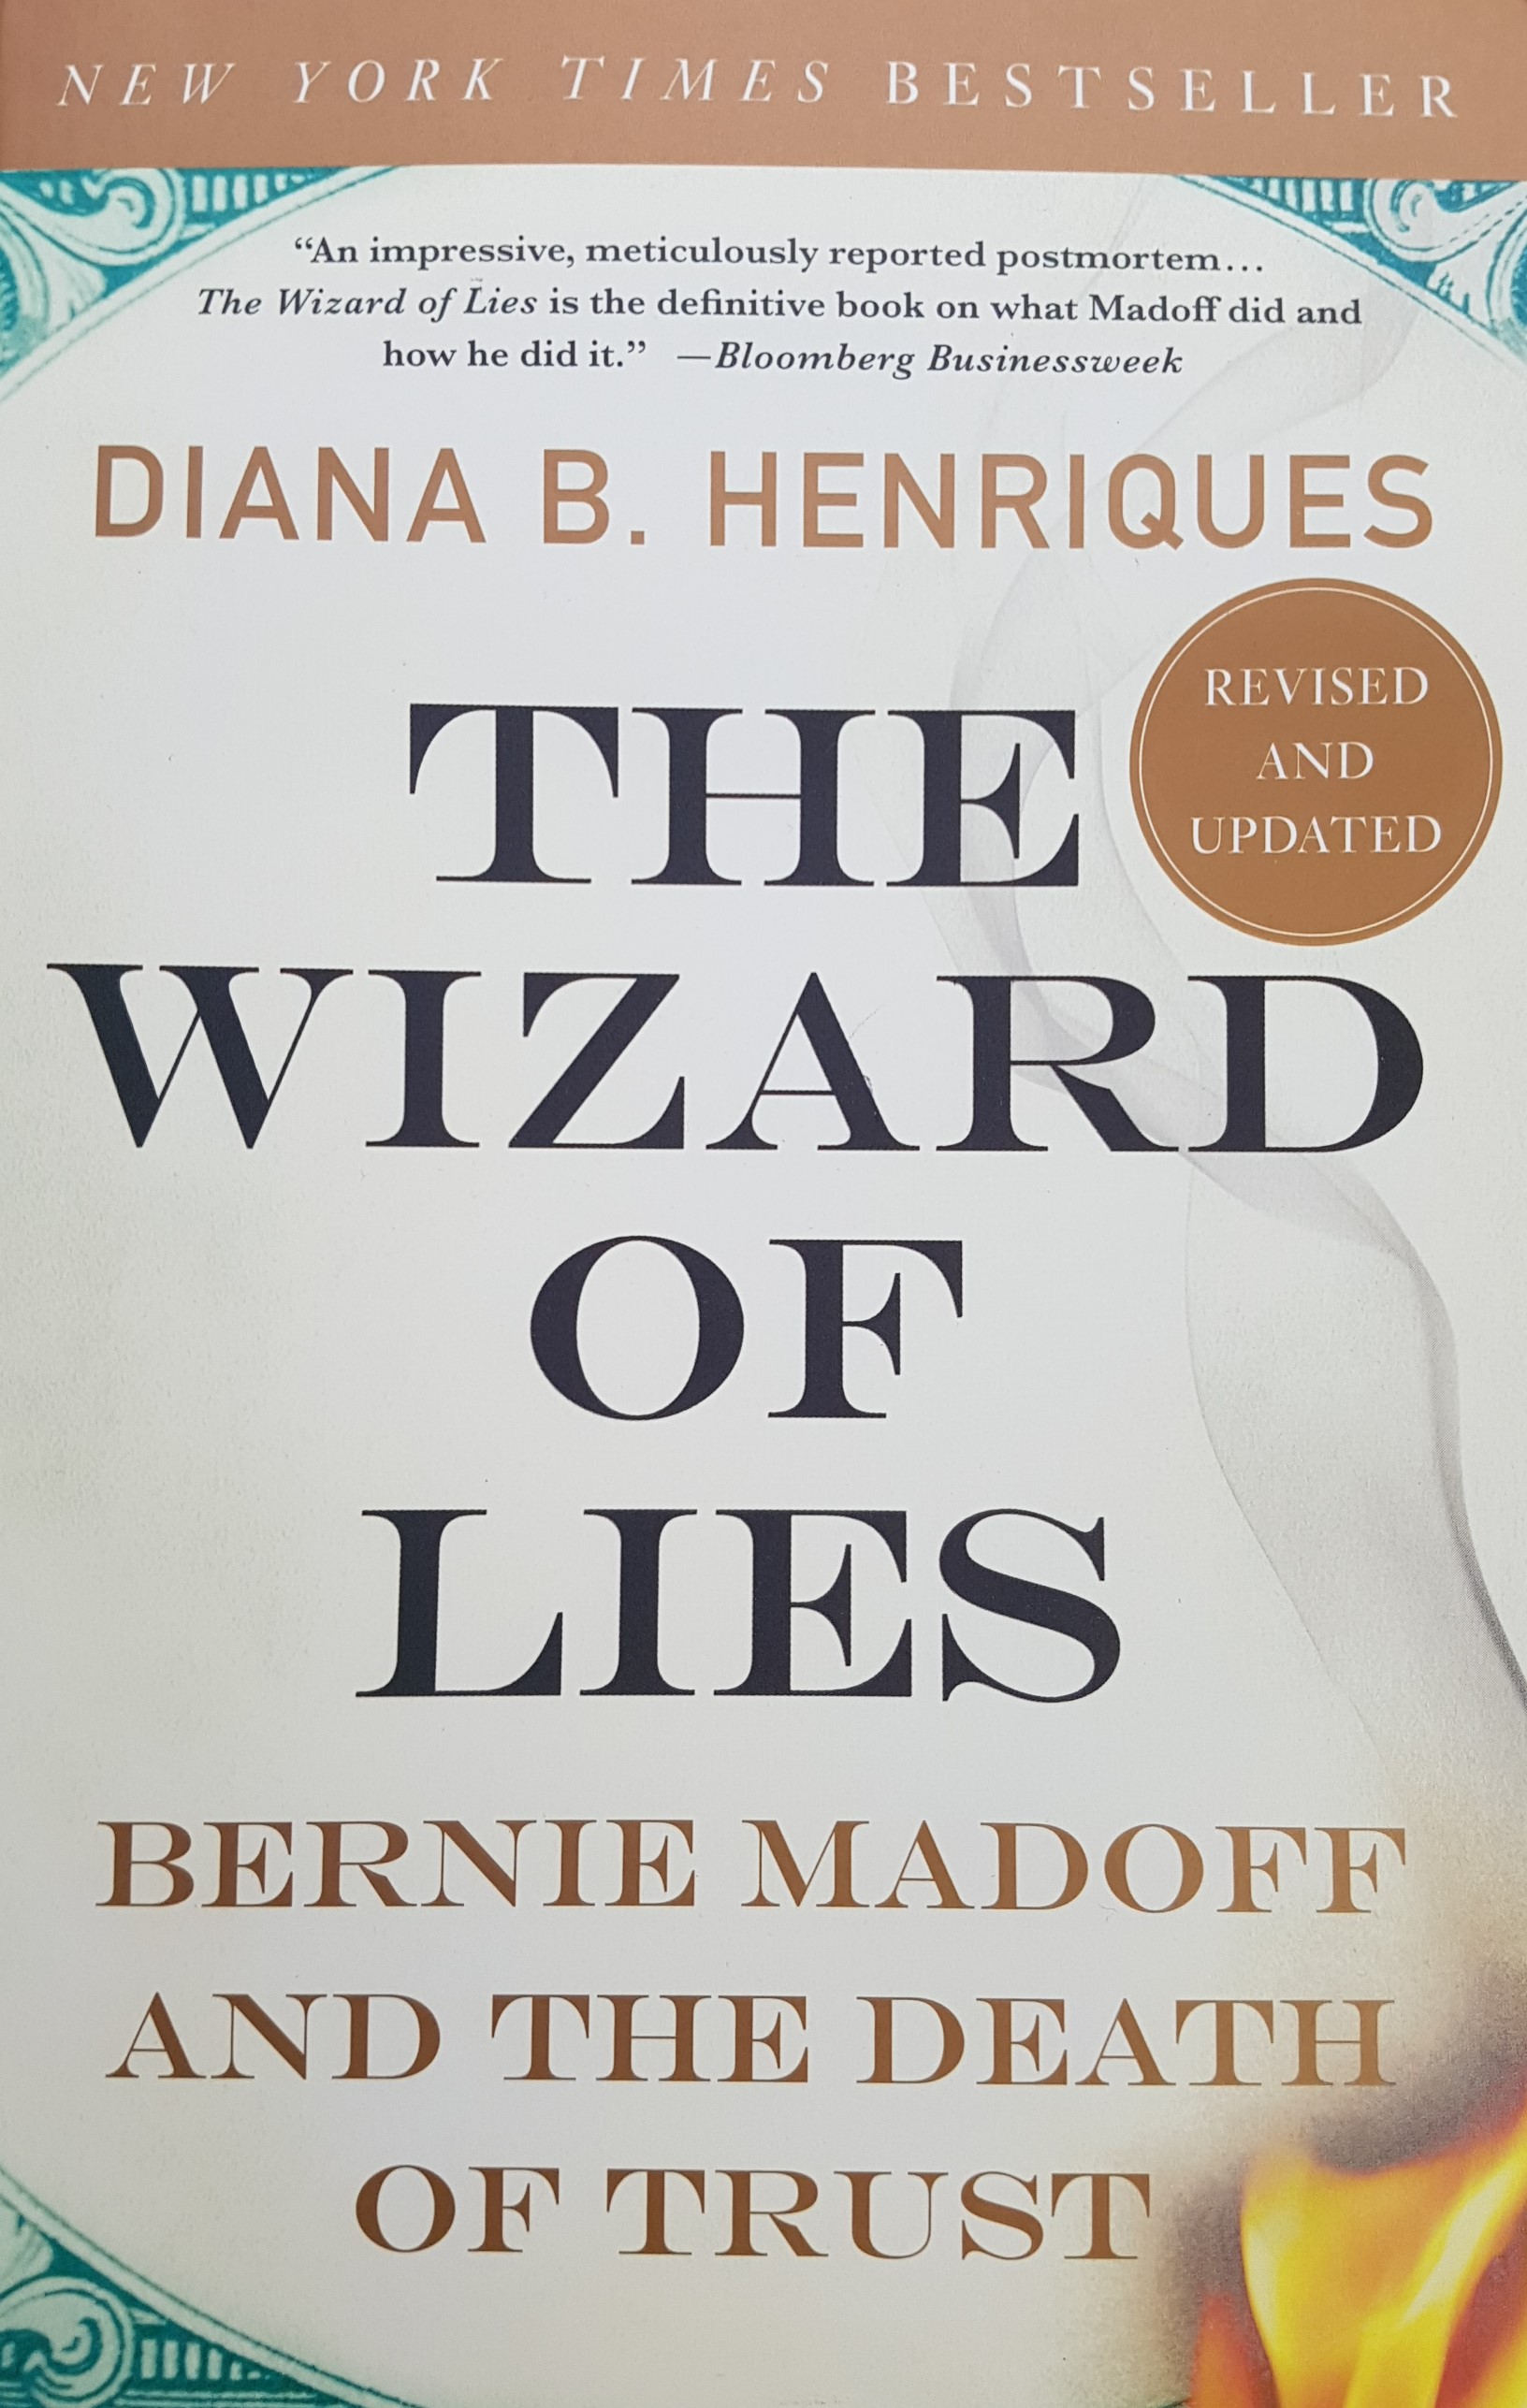 Description The Wizard of Lies: Bernie Madoff and the Death of Trust